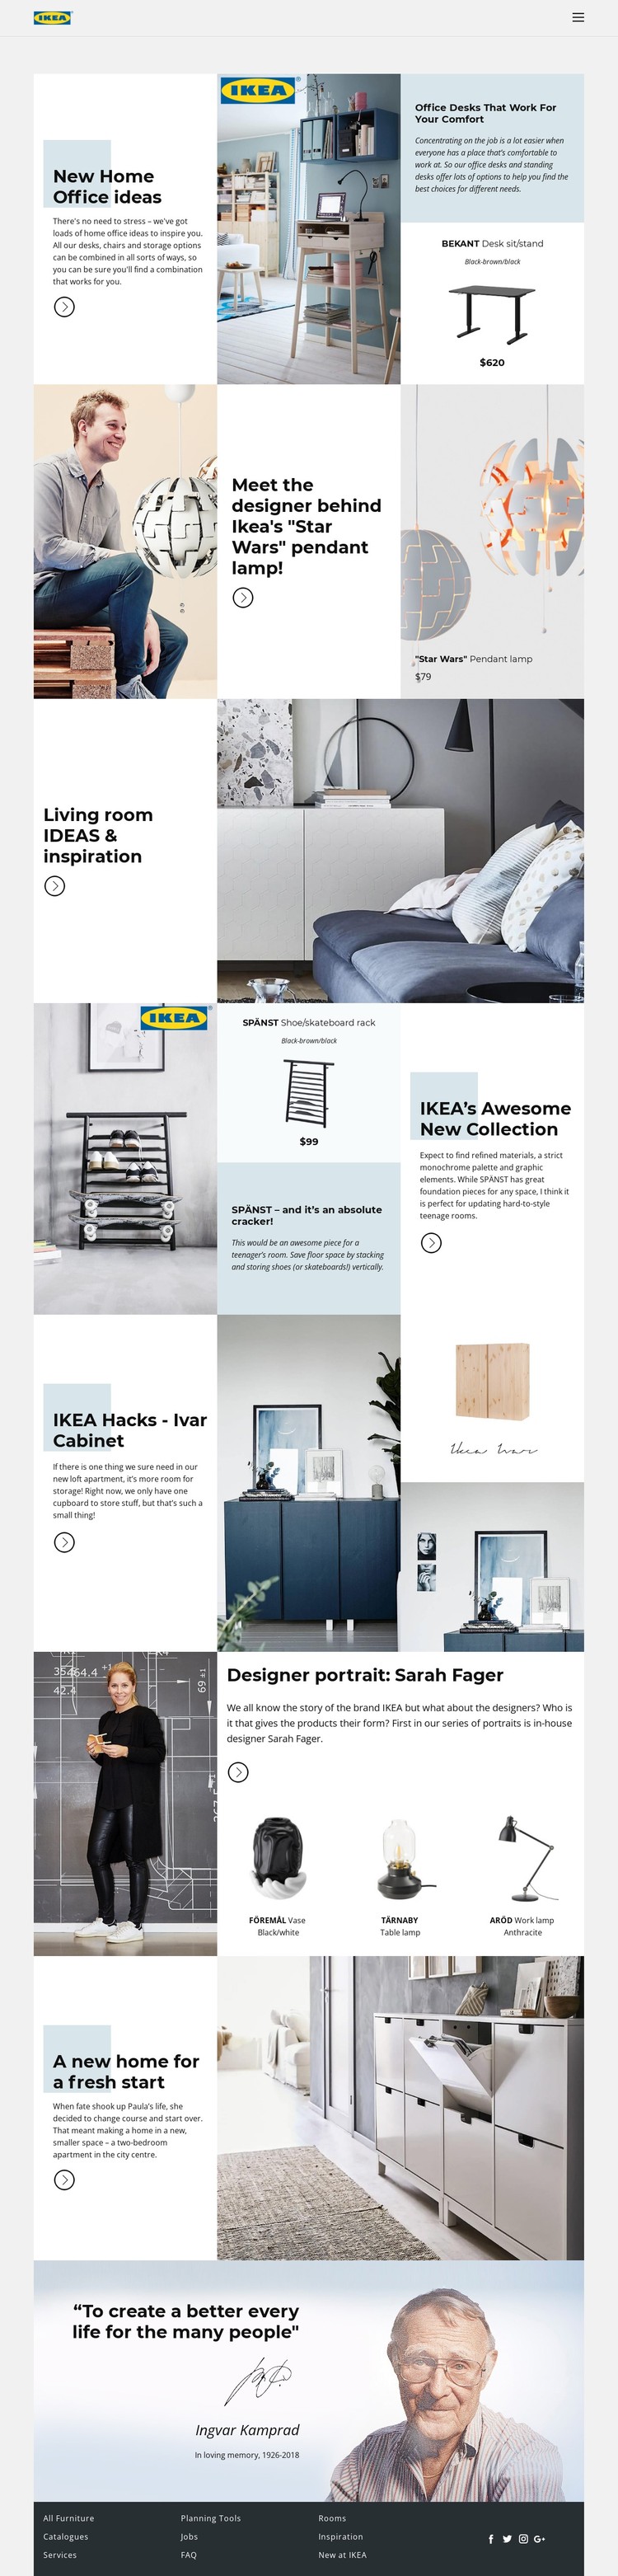 Inspiration from IKEA Static Site Generator